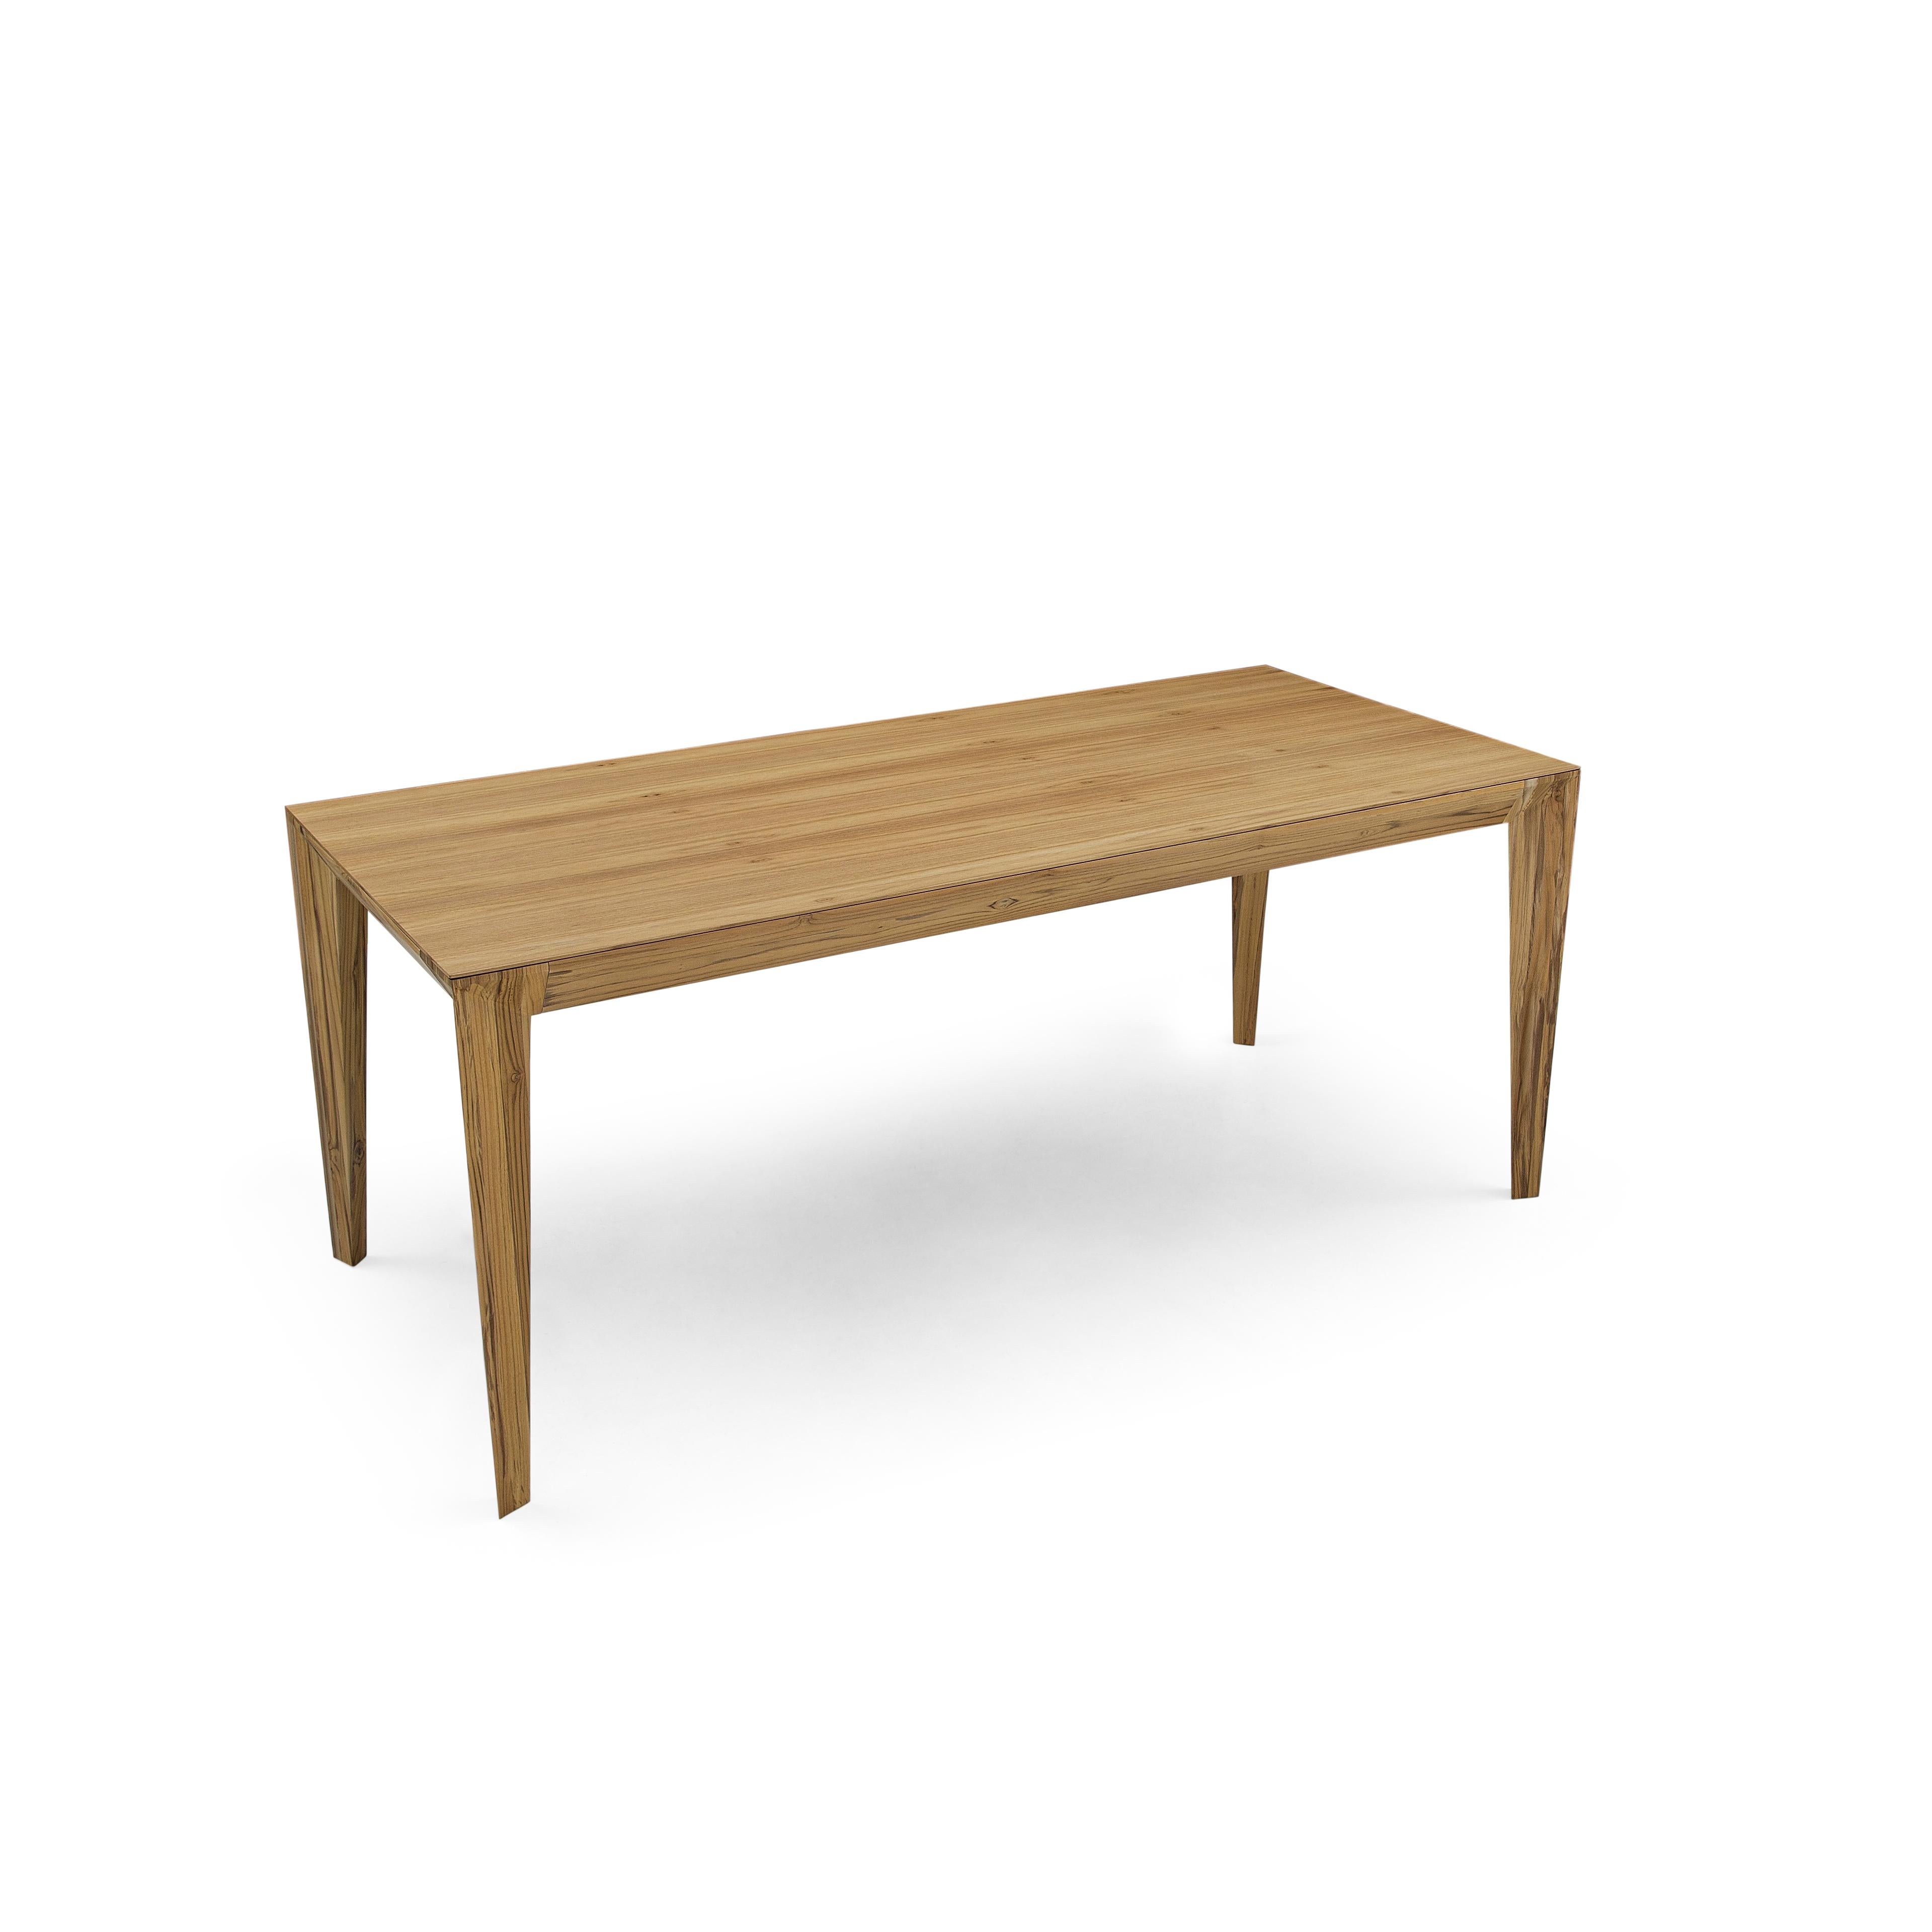 Contemporary Luce Rectangular Dining Table with a Teak Wood Finish Veneered Table Top 95'' For Sale